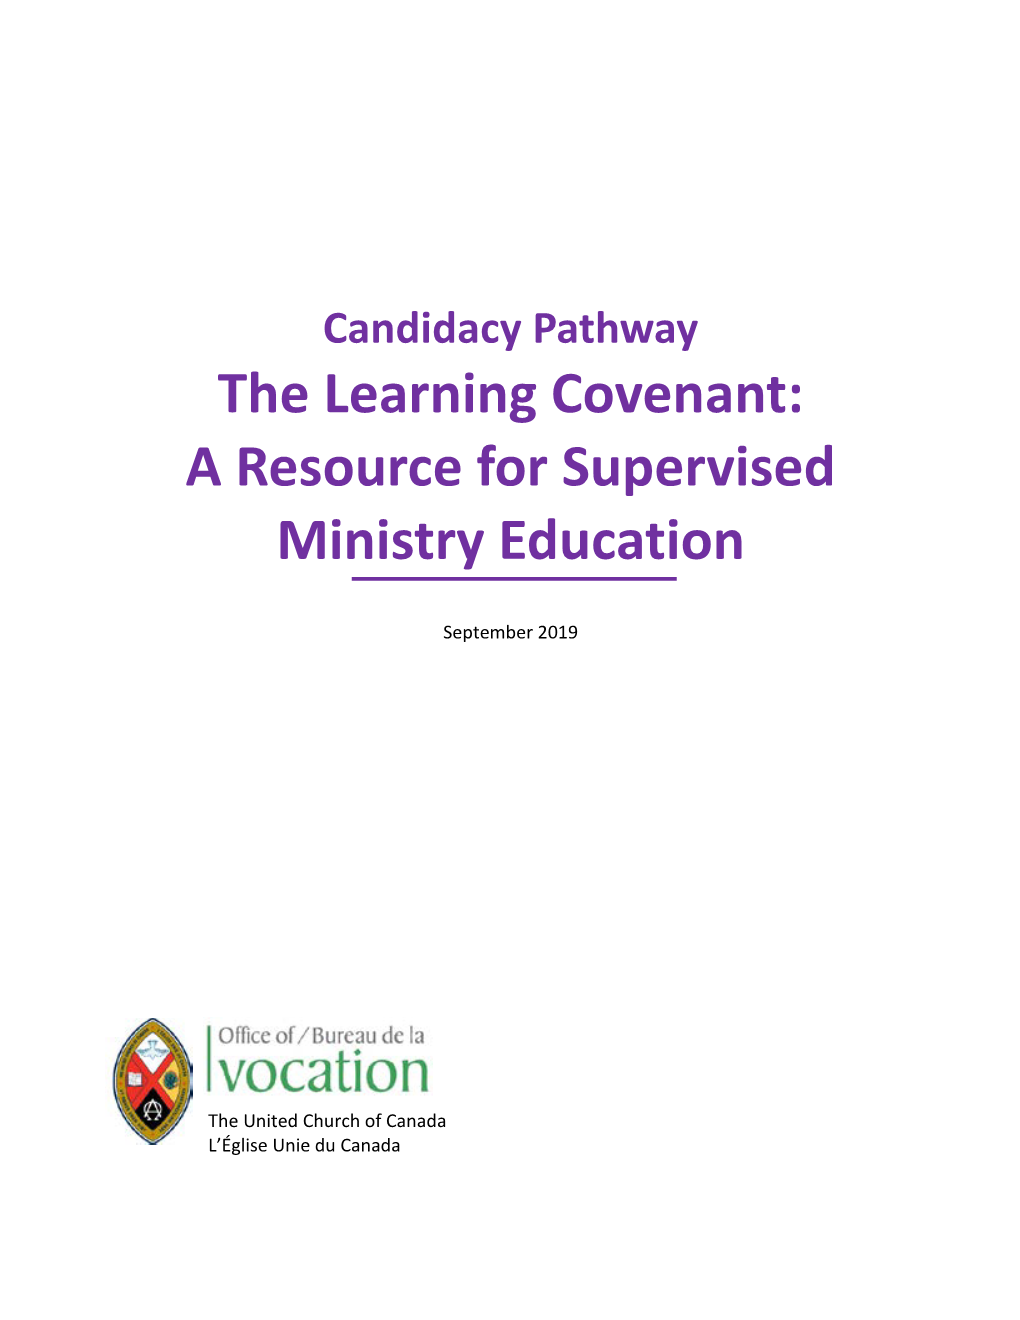 The Learning Covenant: a Resource for Supervised Ministry Education